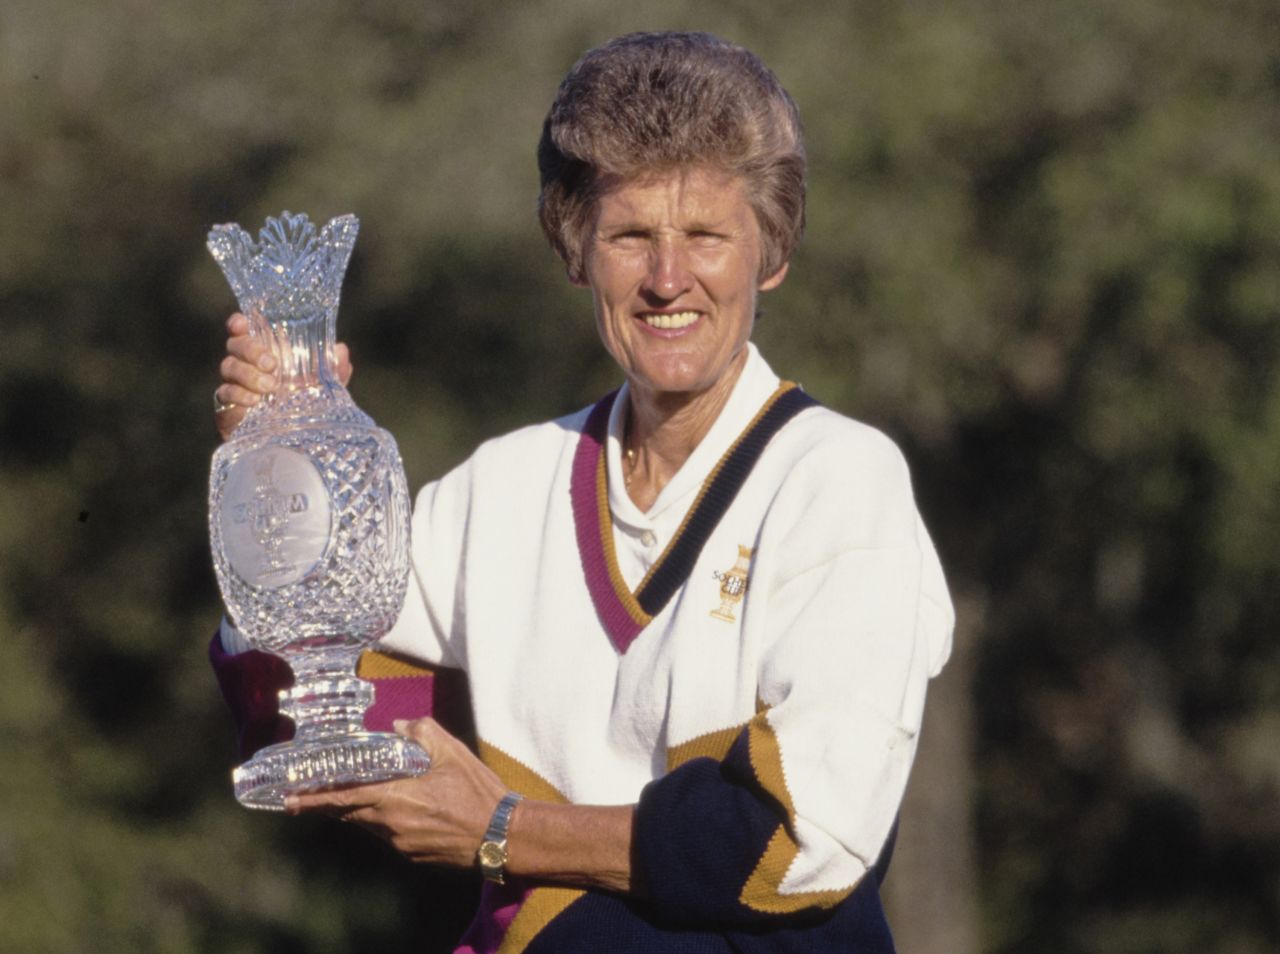 <a href="https://www.cnn.com/2022/12/25/golf/kathy-whitworth-golf-obituary/index.html" target="_blank">Kathy Whitworth, </a>the winningest golfer in history, died at the age of 83, the Ladies Professional Golf Association announced on Sunday, December 25. Whitworth is considered one of the greatest golfers of all time. She had 88 wins on the LPGA Tour, including six major championships. Her 88 wins are six more than Sam Snead and Tiger Woods, who hold the record for the men's game.